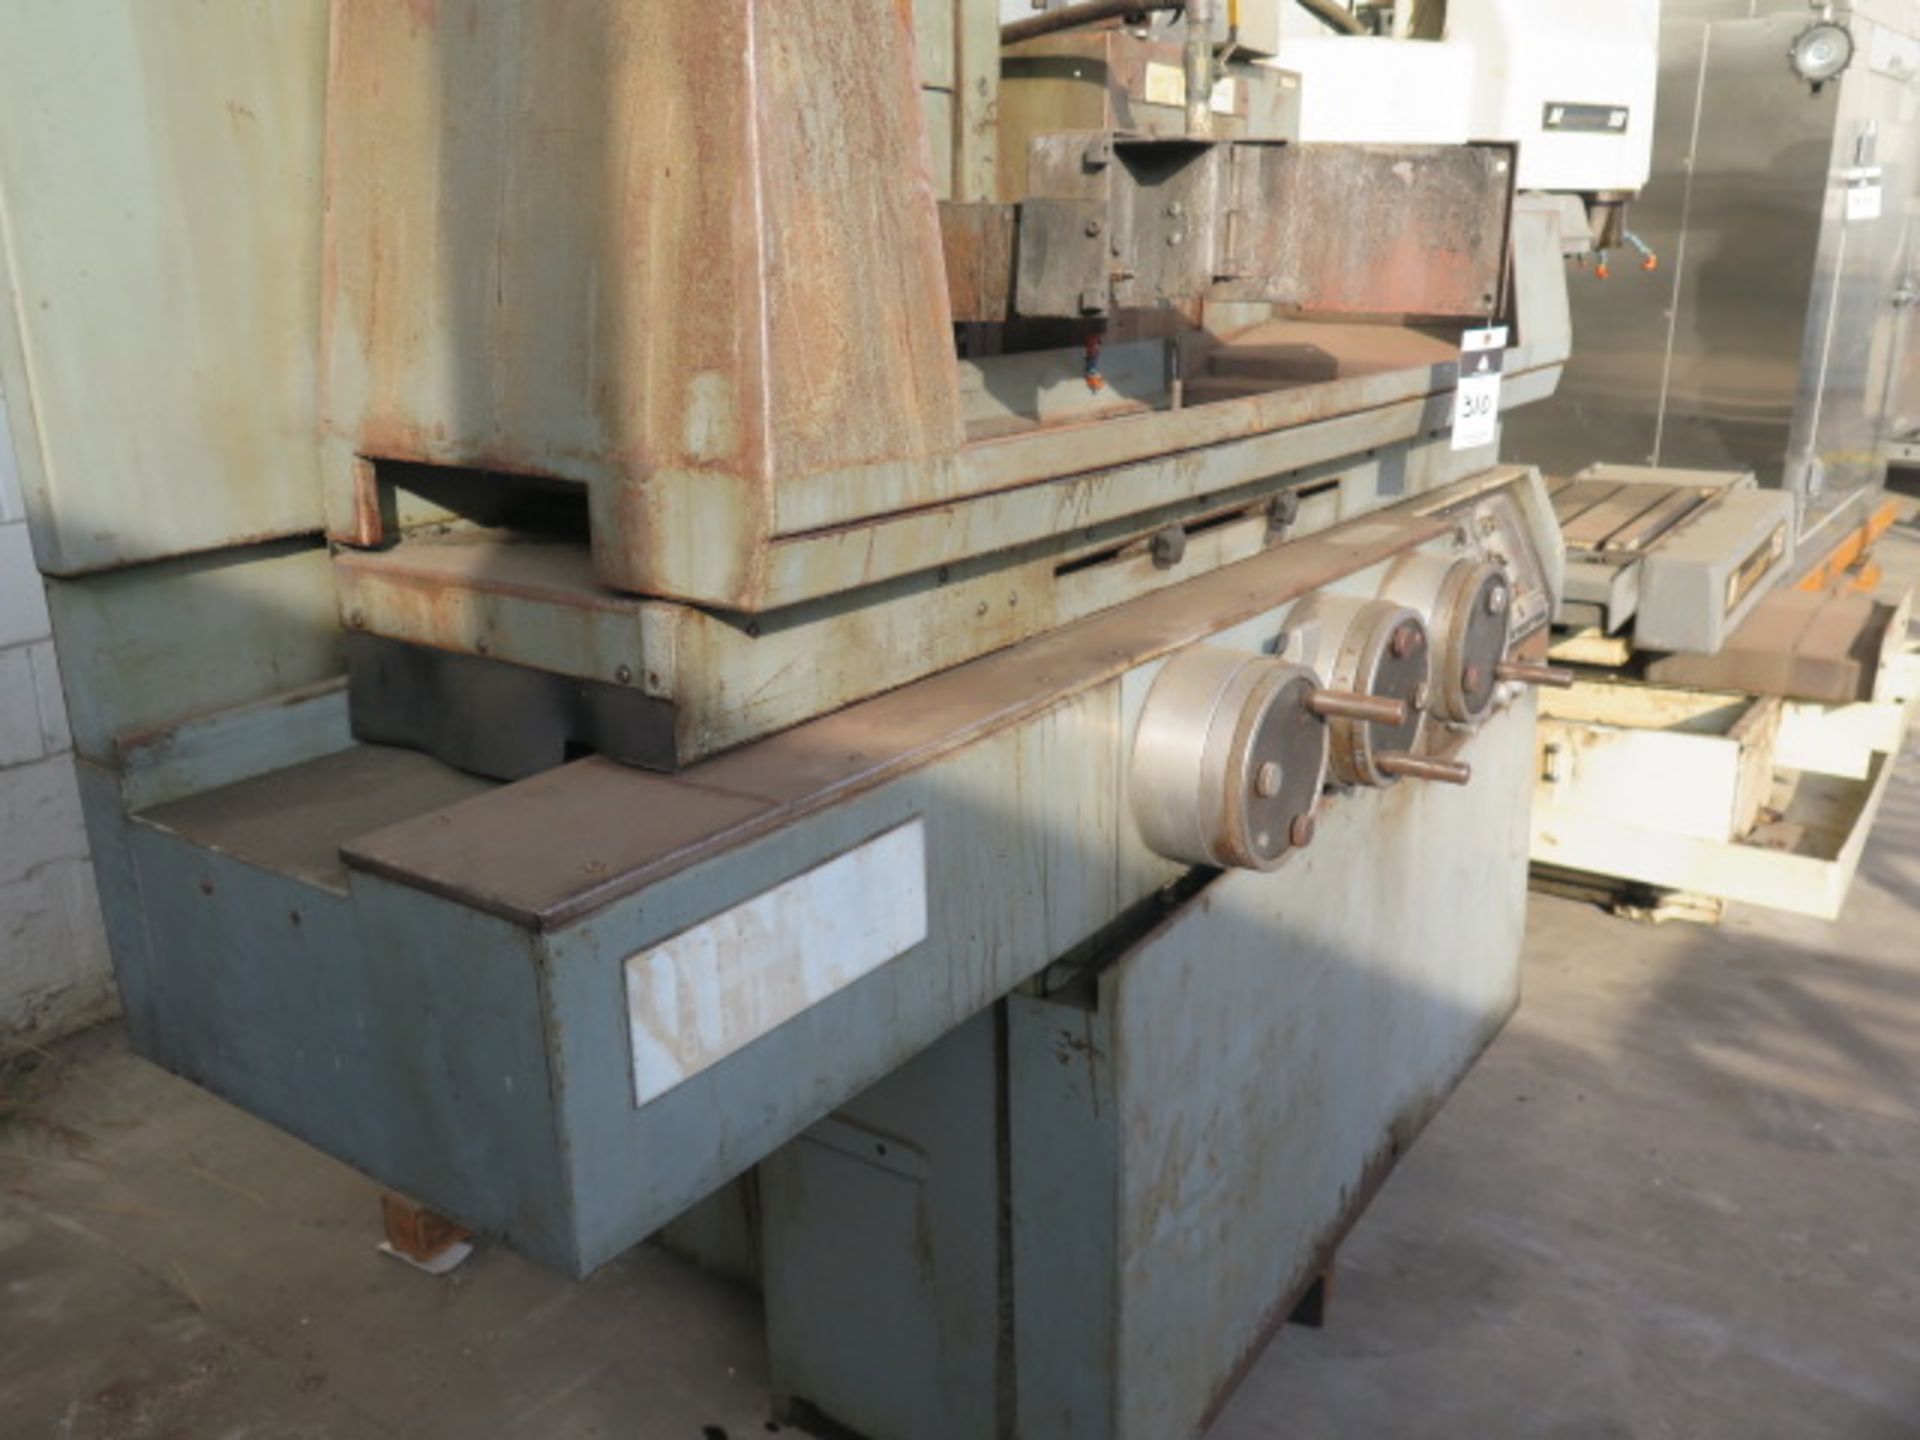 Brown & Sharpe 818 8" x 18" Automatic Surface grinder s/n 523-1818-1187 (NO CHUCK) - Image 3 of 7